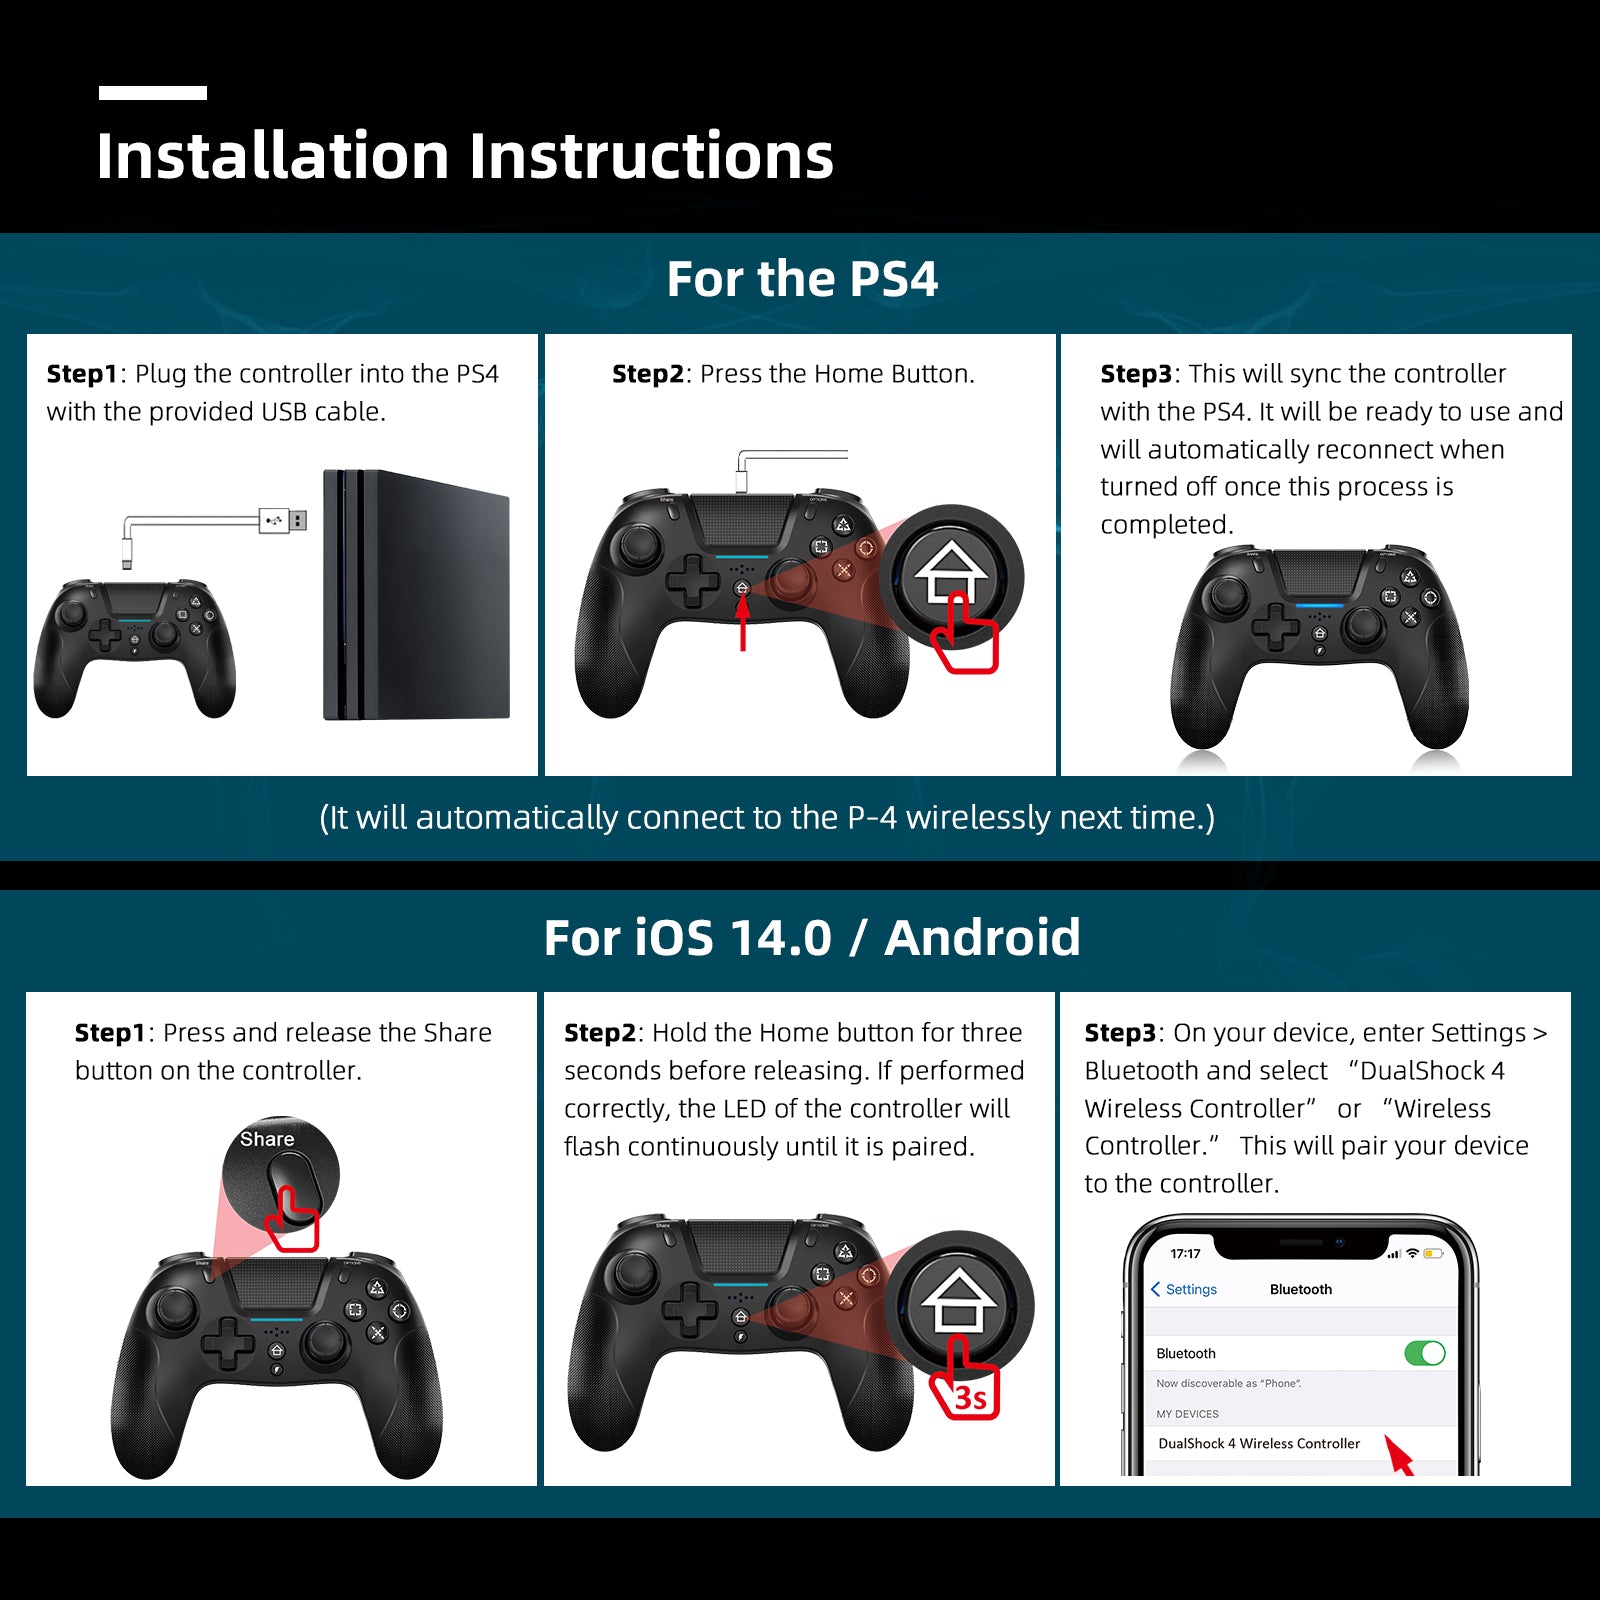 Installation Instructions for the PS4 and for iOS 14.0 / Android.